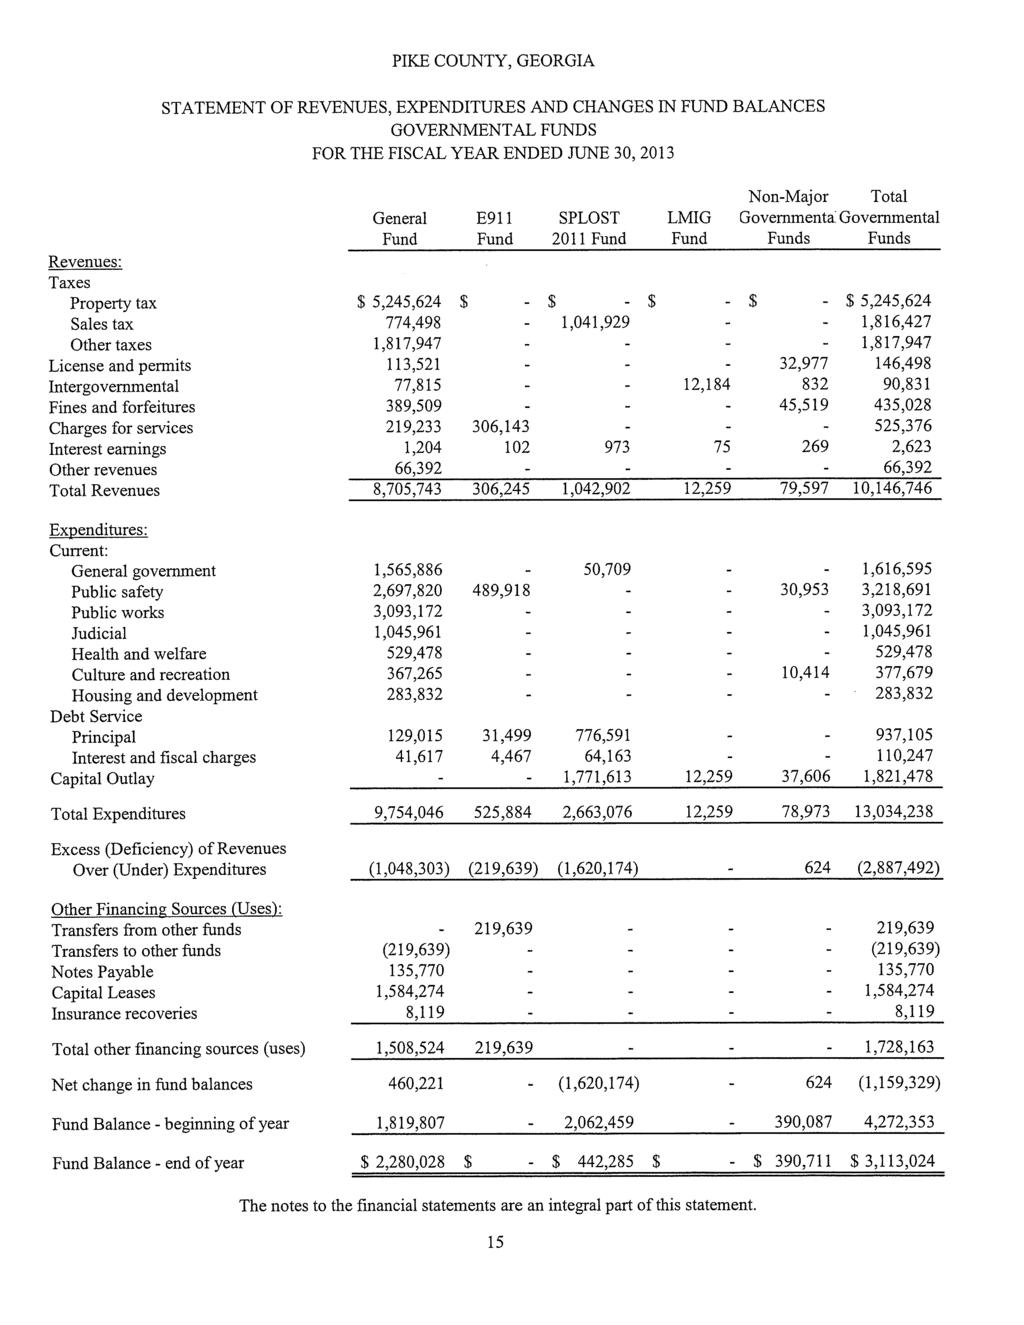 STATEMENT OF REVENUES, EXPENDITURES AND CHANGES IN FUND BALANCES GOVERNMENTAL FUNDS FOR THE FISCAL YEAR ENDED JUNE 30, 2013 Revenues: Taxes Property tax Sales tax Other taxes License and permits